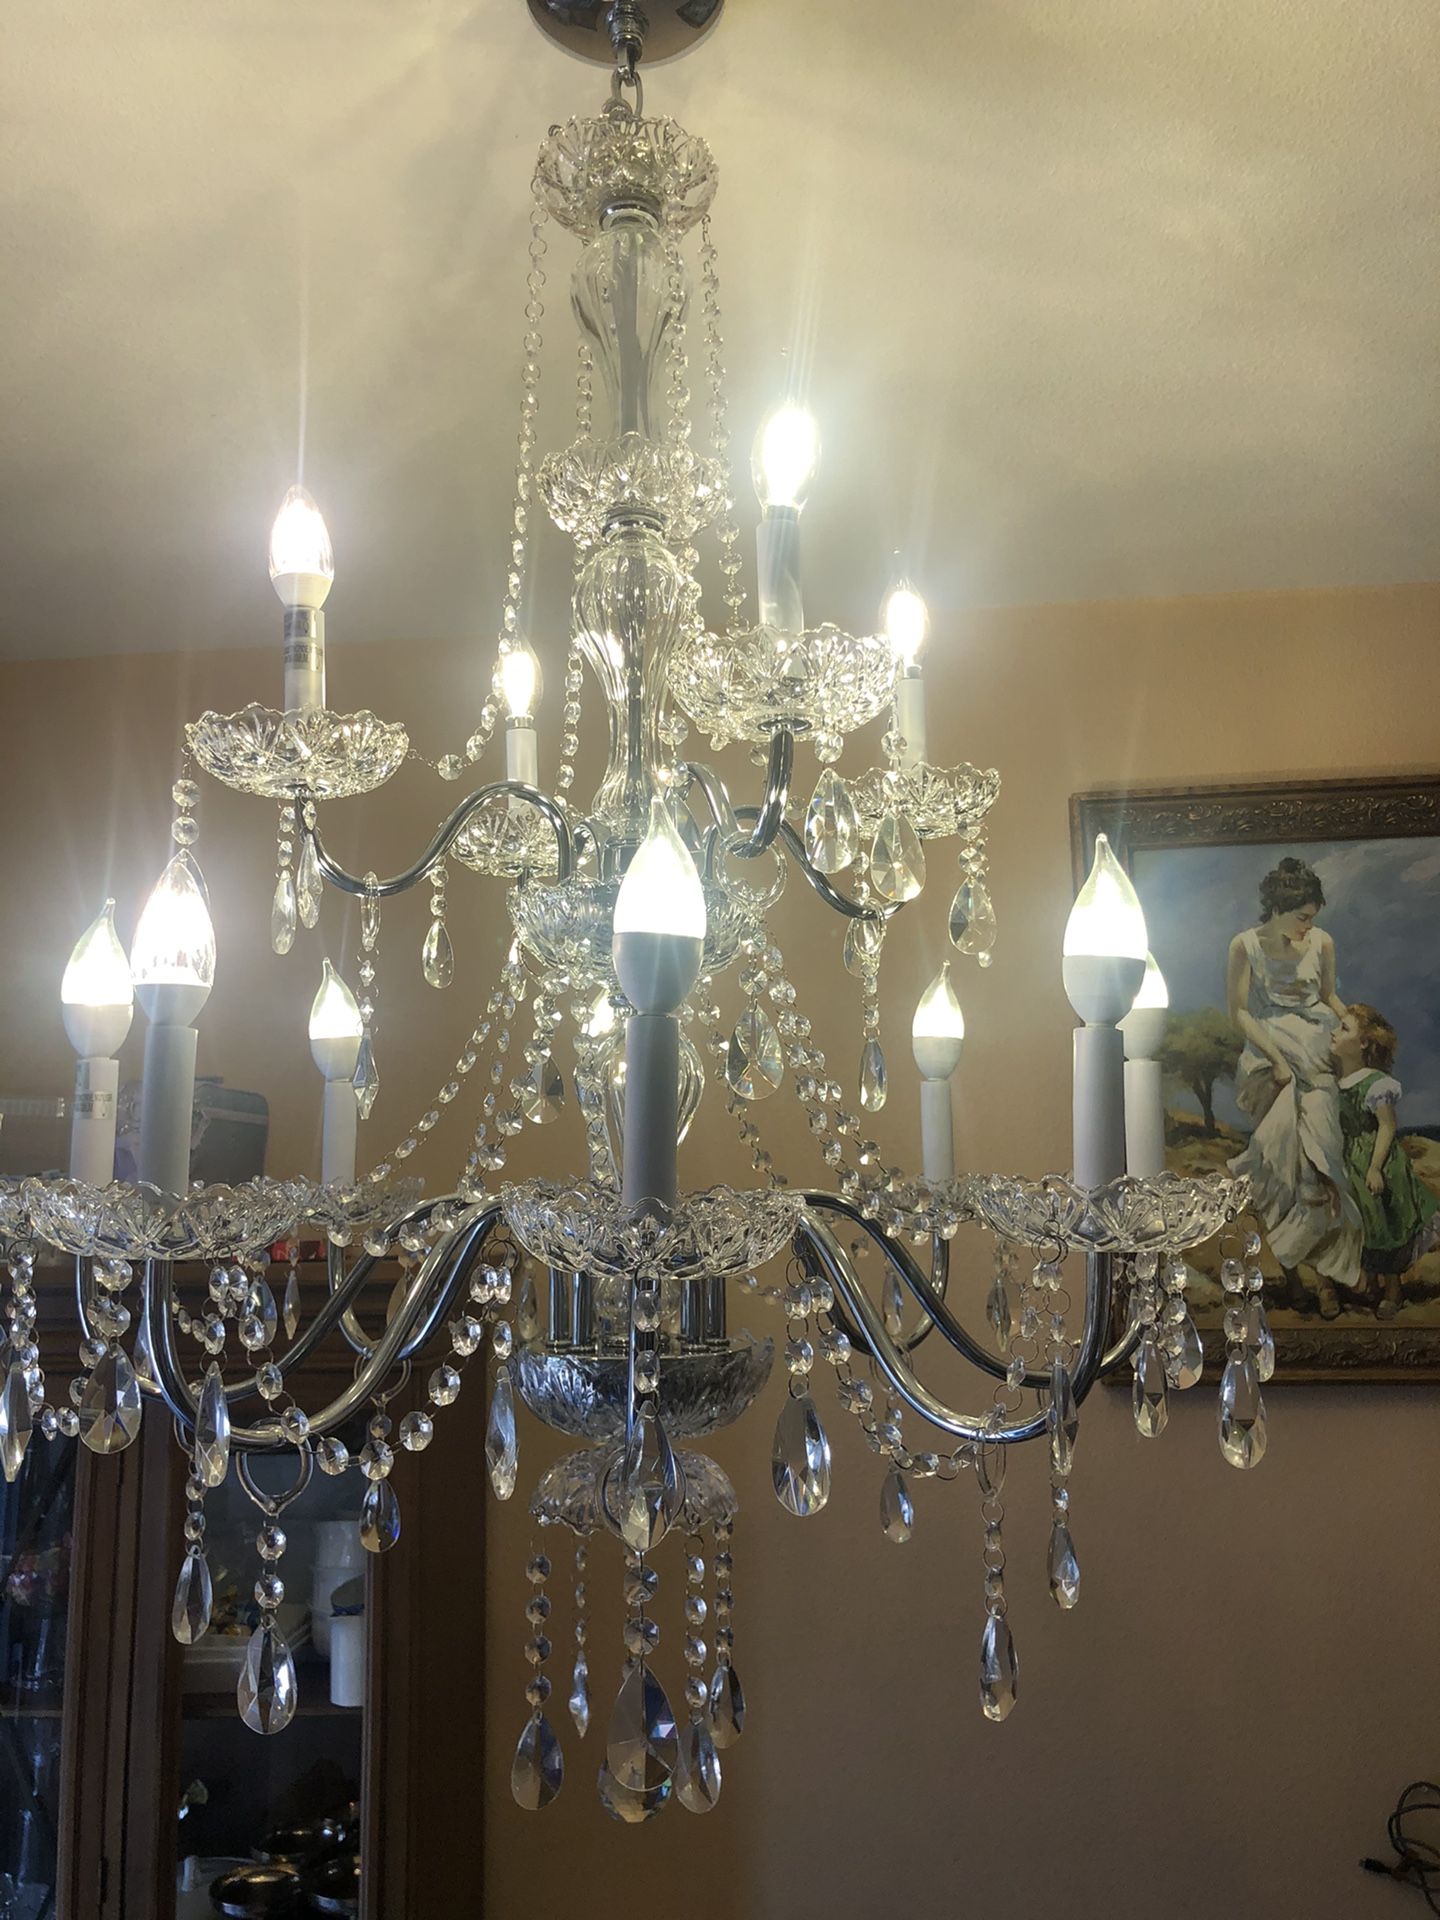 Beautiful chandelier for a beautiful home